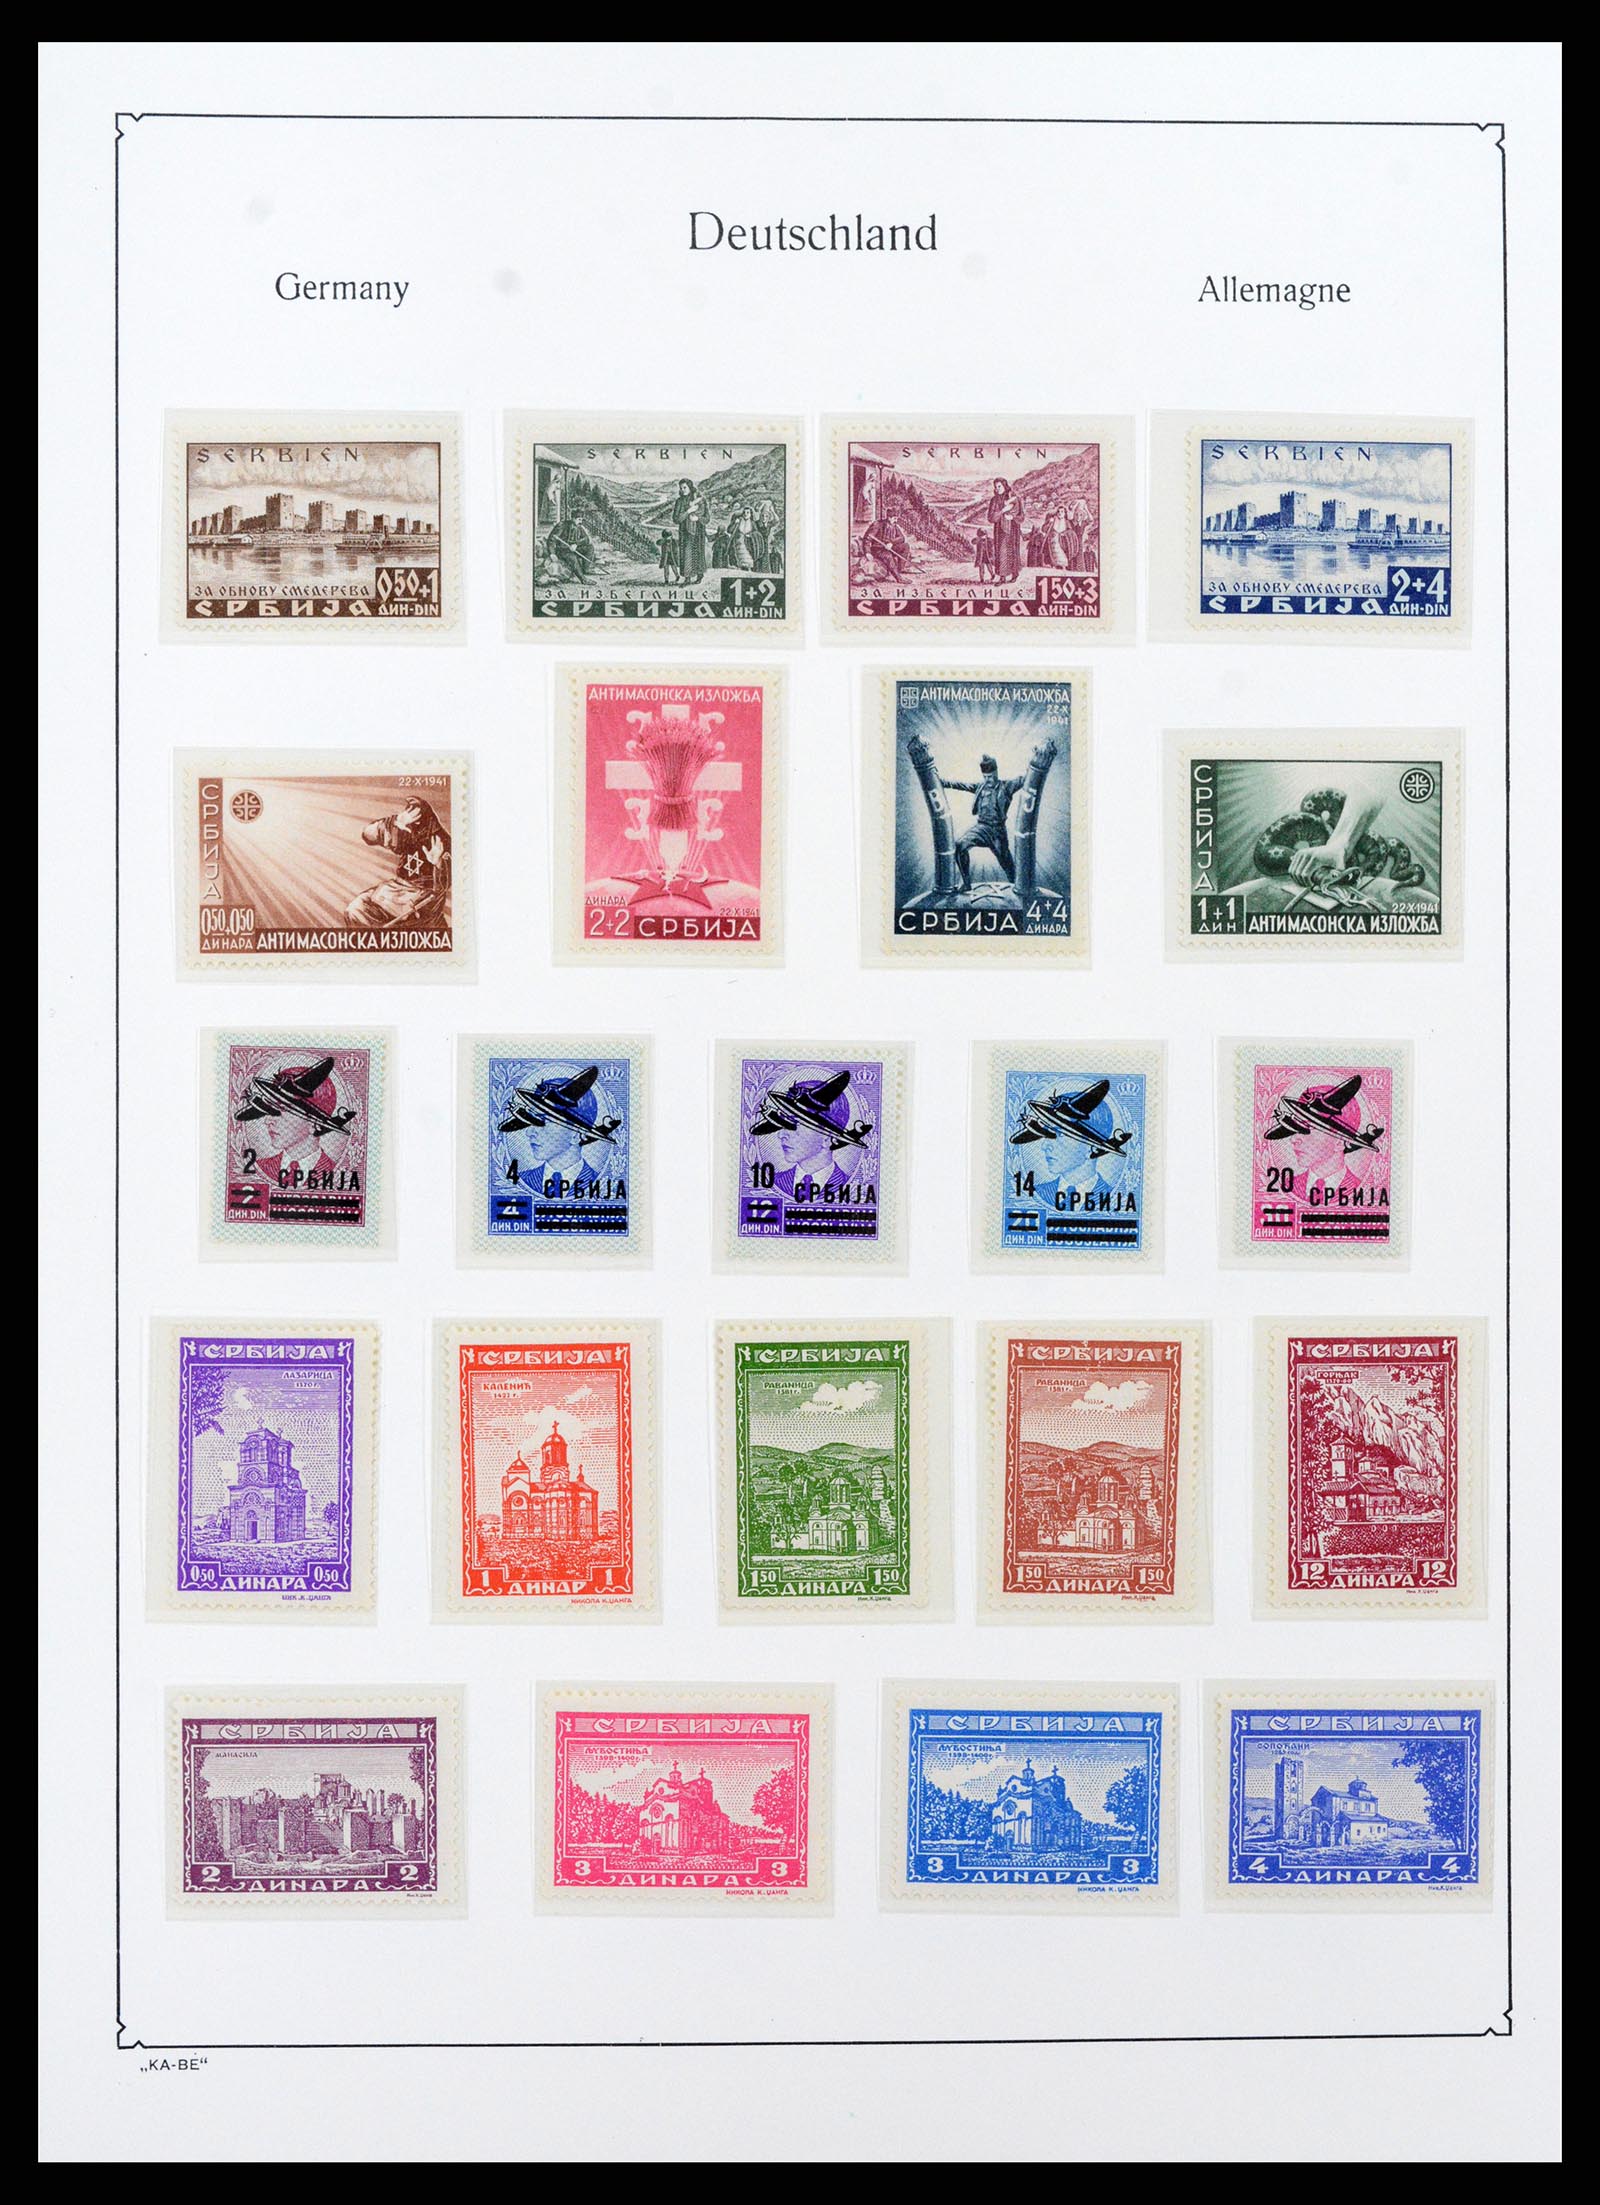 37270 022 - Stamp collection 37270 German occupations 1939-1945.